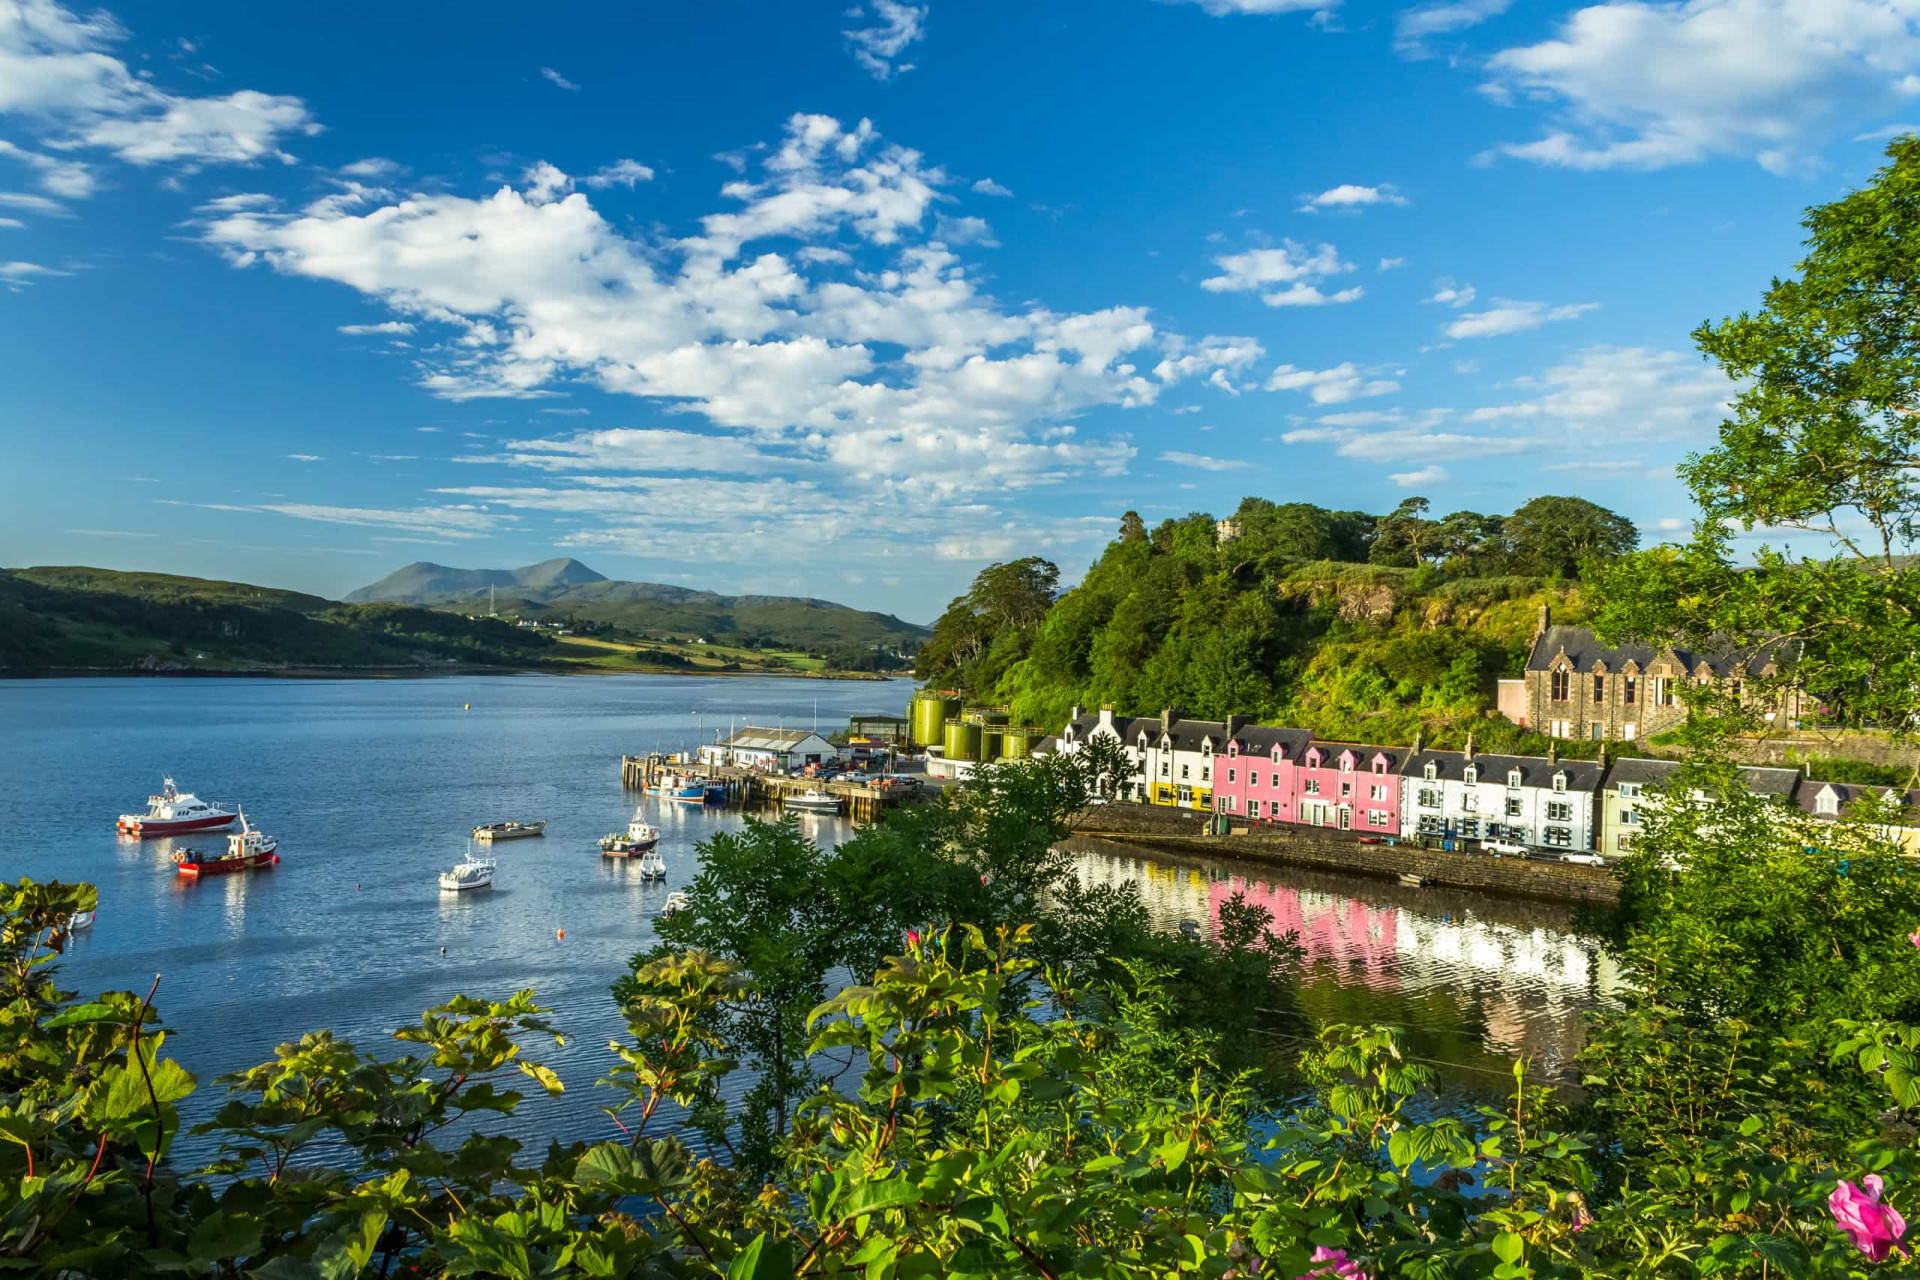 <p>Portree is one of the largest towns on the Isle of Skye and so makes a perfect base if you are going to explore the island further. It is a great town with wonderful fresh seafood and good views.</p> <p>Sources: (PlanetWare) (Hand Luggage Only)</p> <p>See also: <a href="https://www.starsinsider.com/travel/456353/britains-historic-religious-ruins">Britain historic religious ruins</a></p>